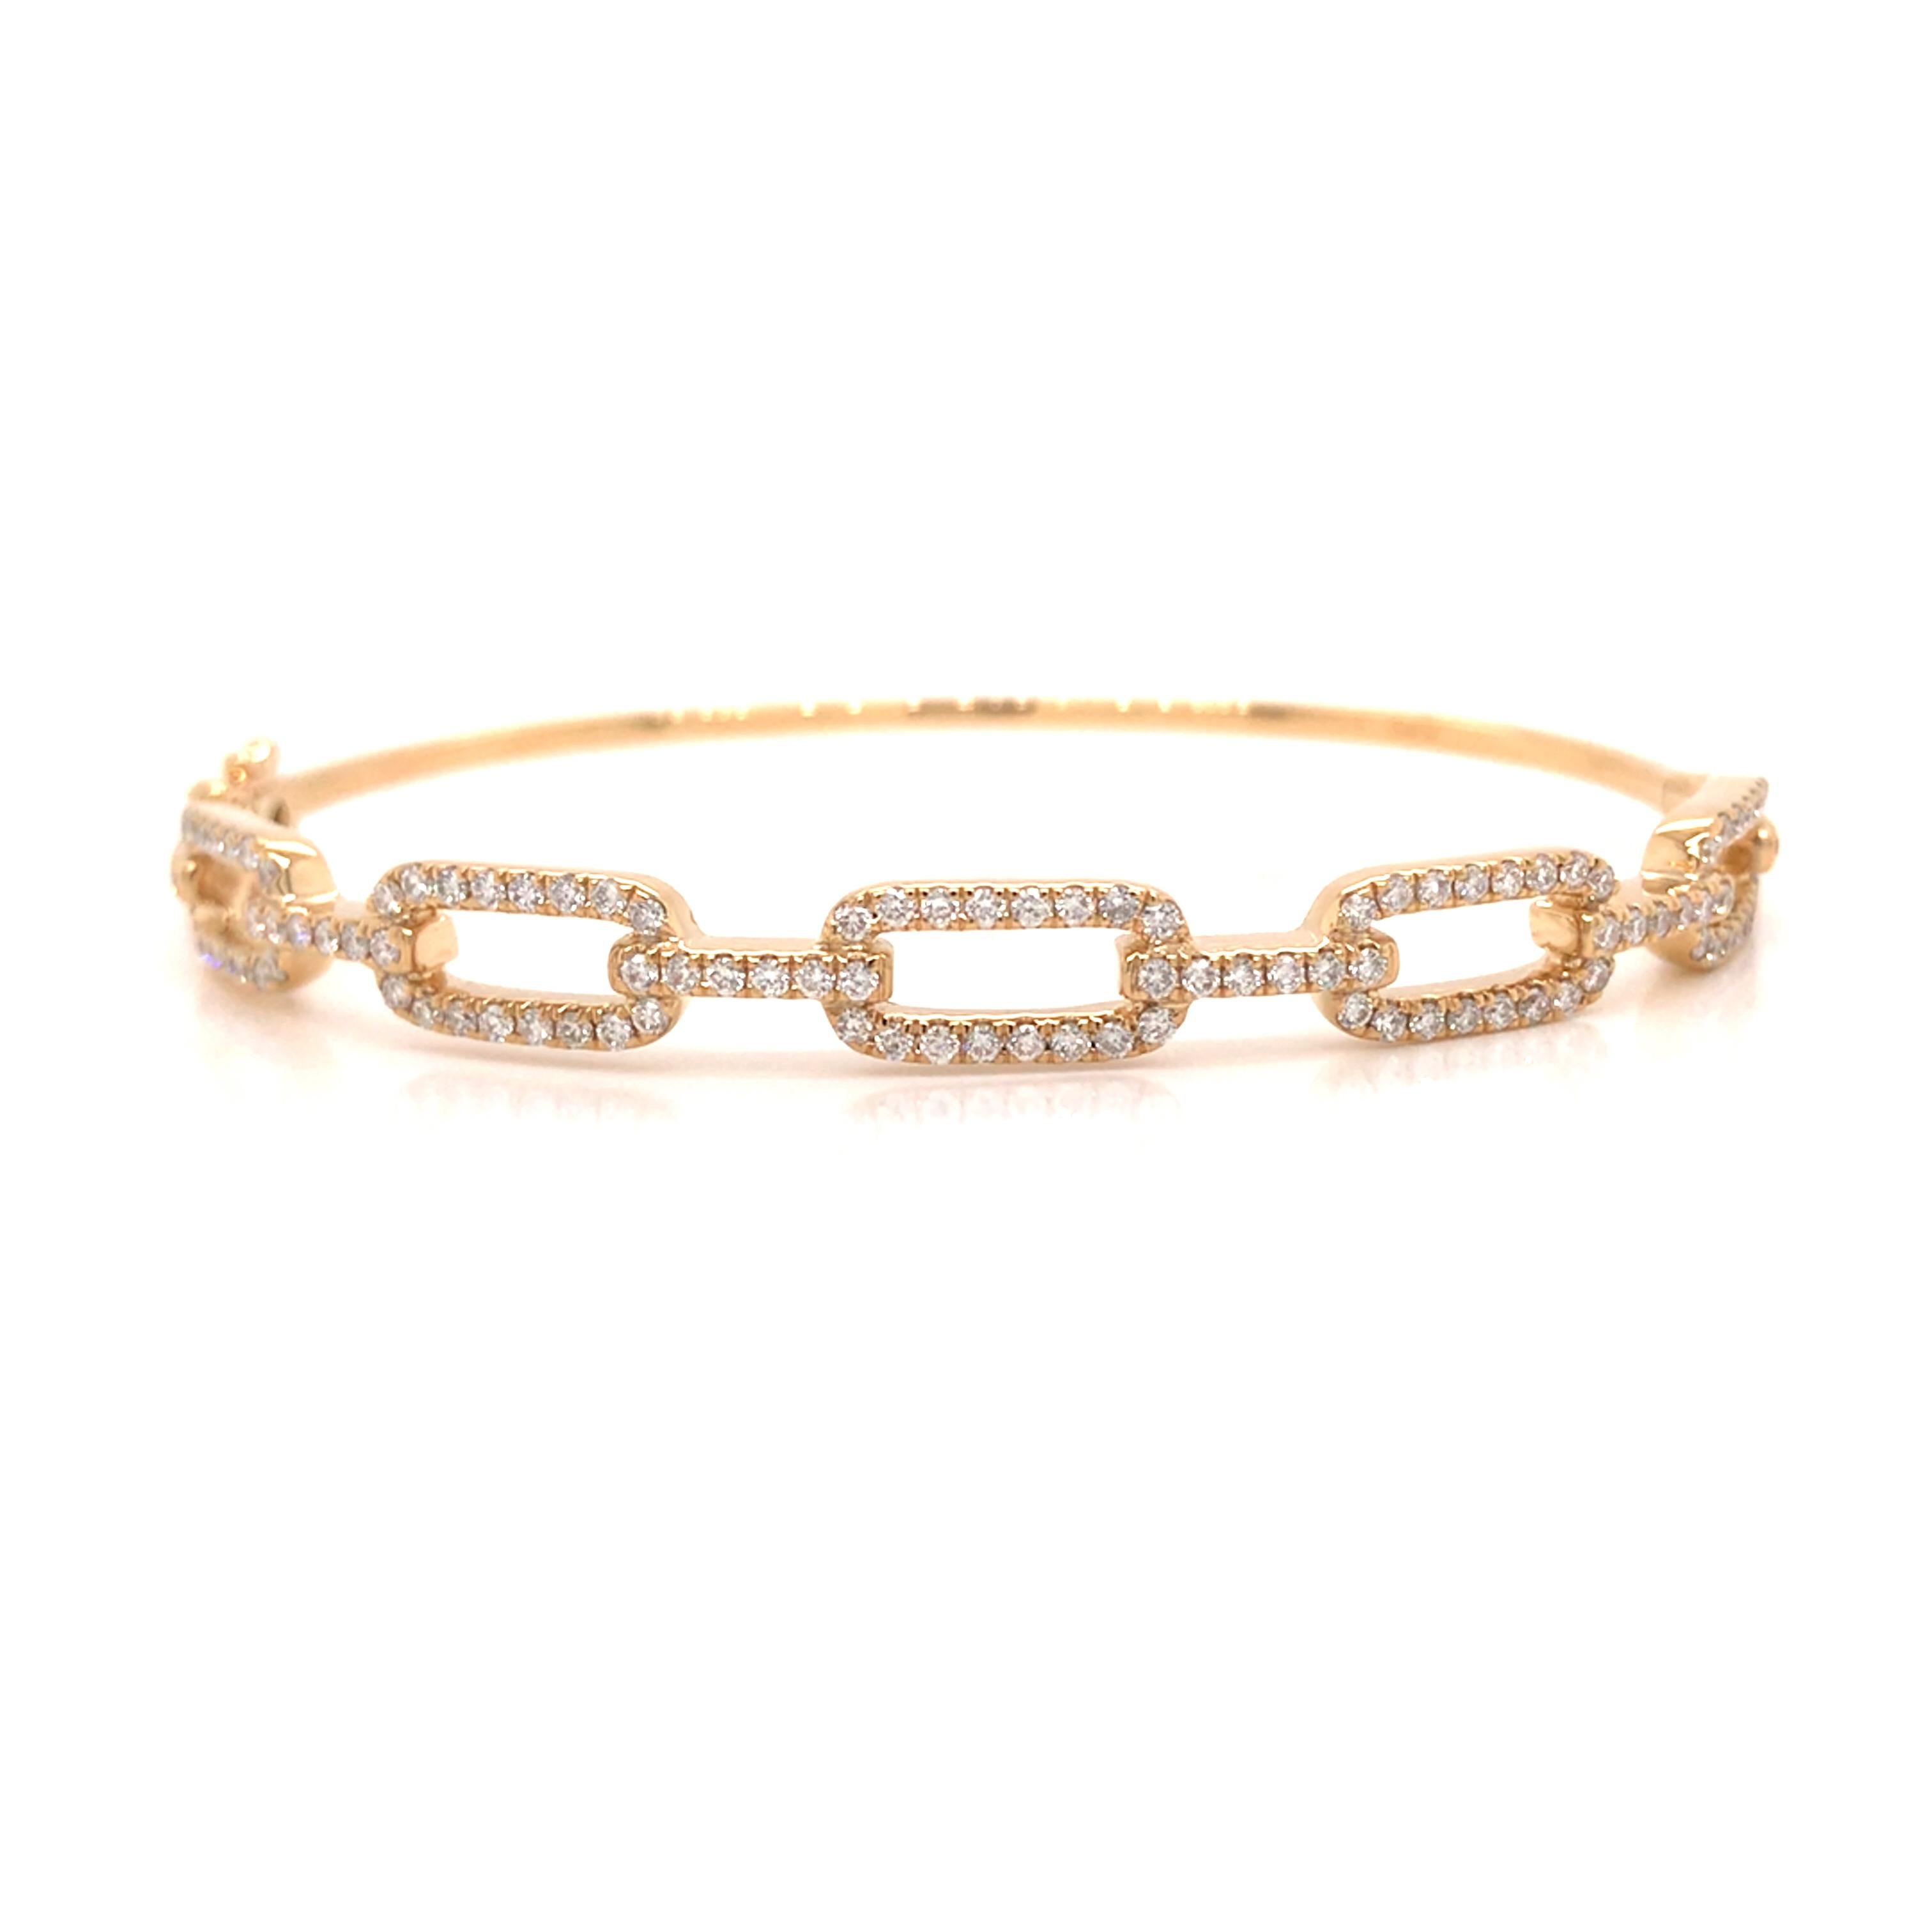 Diamond Link Bangle Bracelet in 14K Yellow Gold. Round Brilliant Cut Diamonds weighing 0.92 carat total weight G-H in color and VS-SI in clarity are expertly set.  The Bracelet measures 6 1/2 inch inner circumference and 1/4 inch in width.  9.5